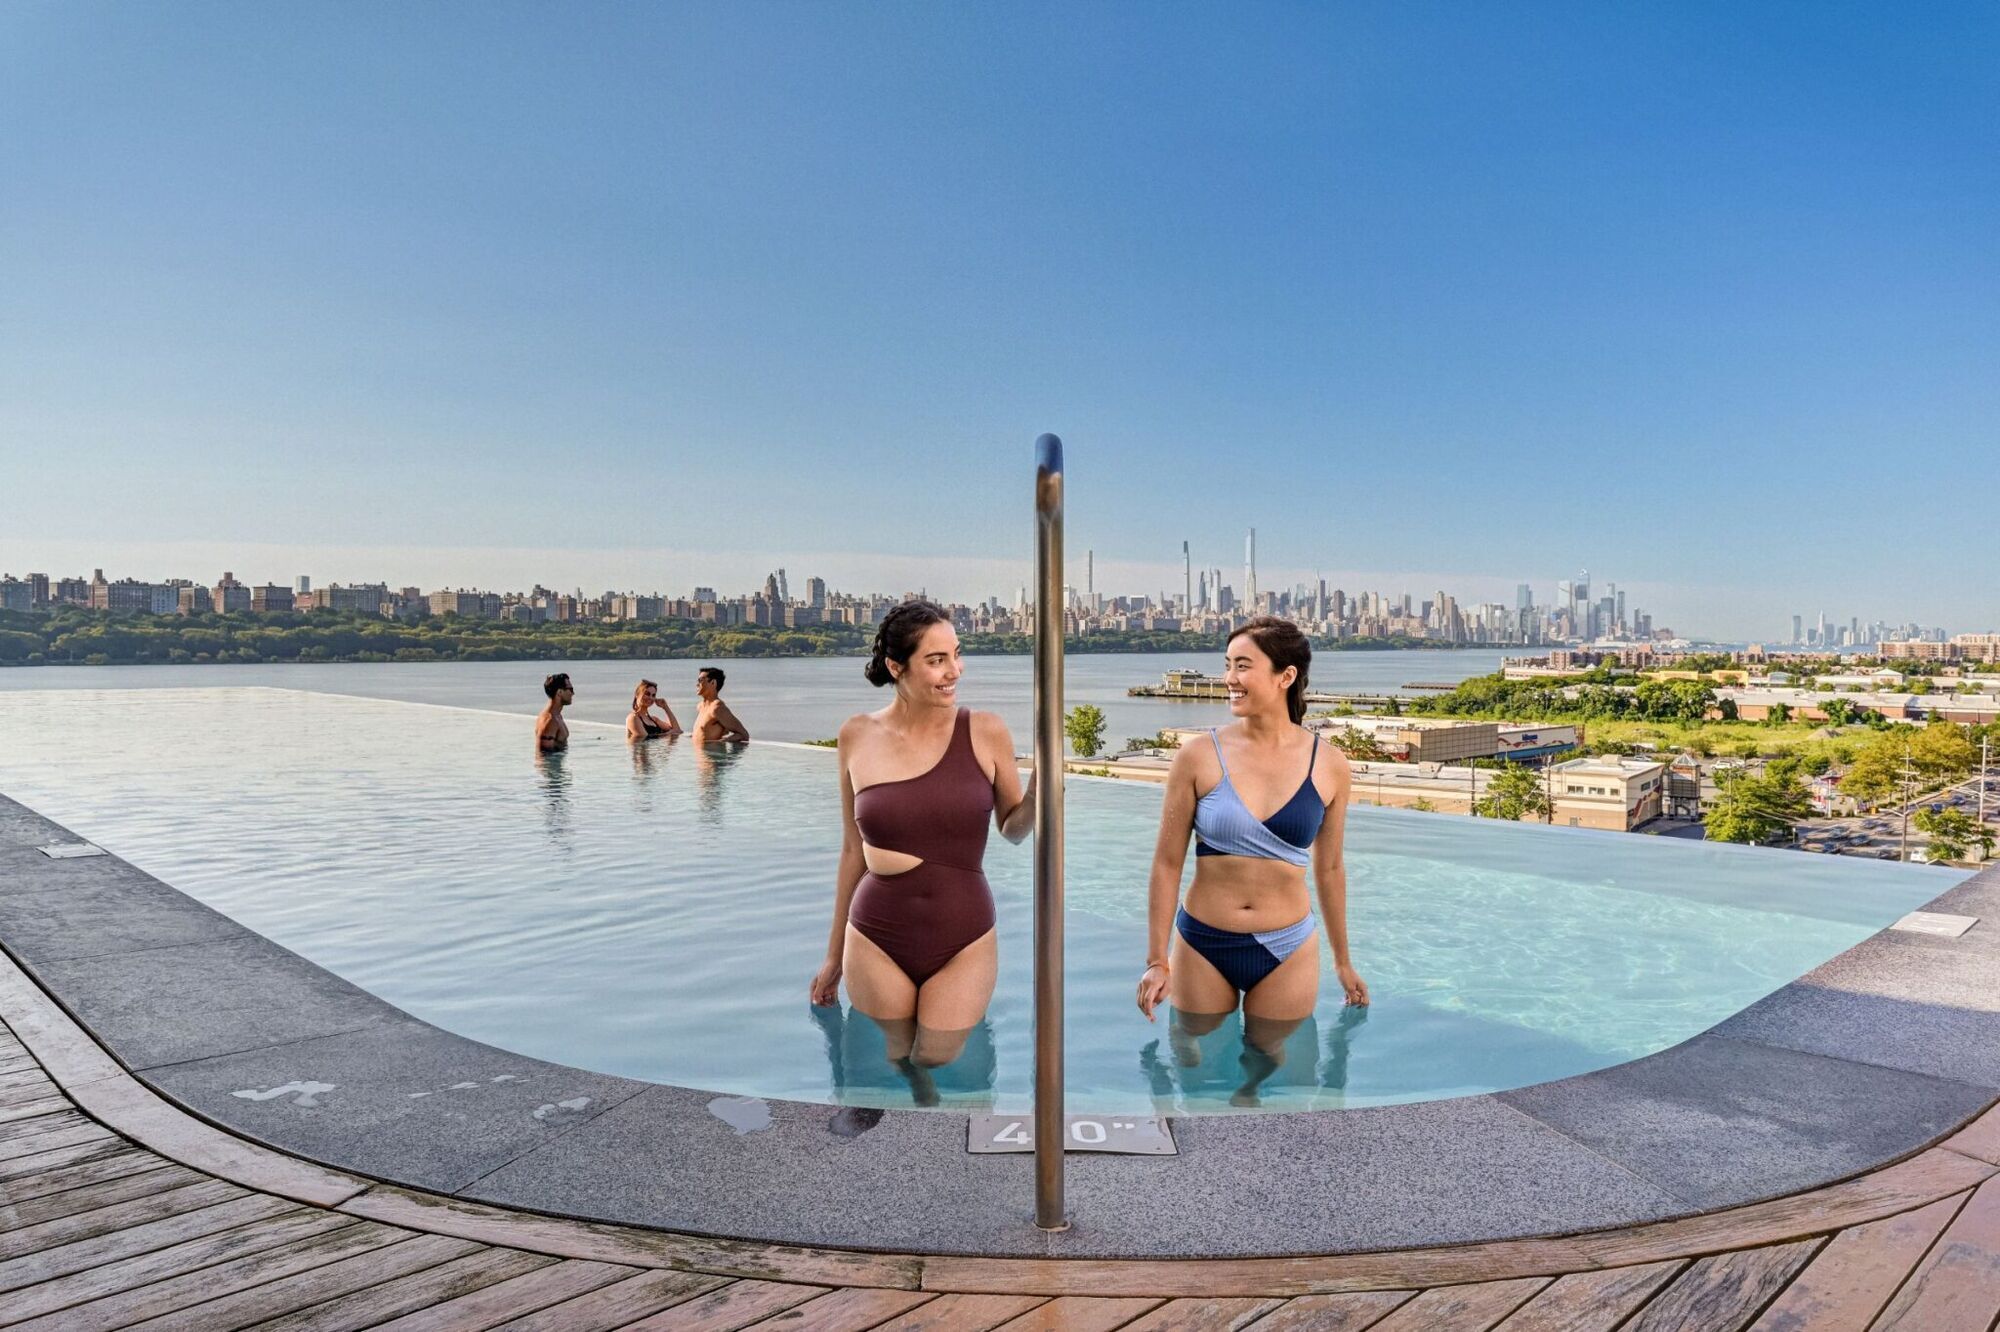 Top NYC hotels with gorgeous rooftop pools: 8 perfect places to relax in the heat by the water with drinks and stunning views